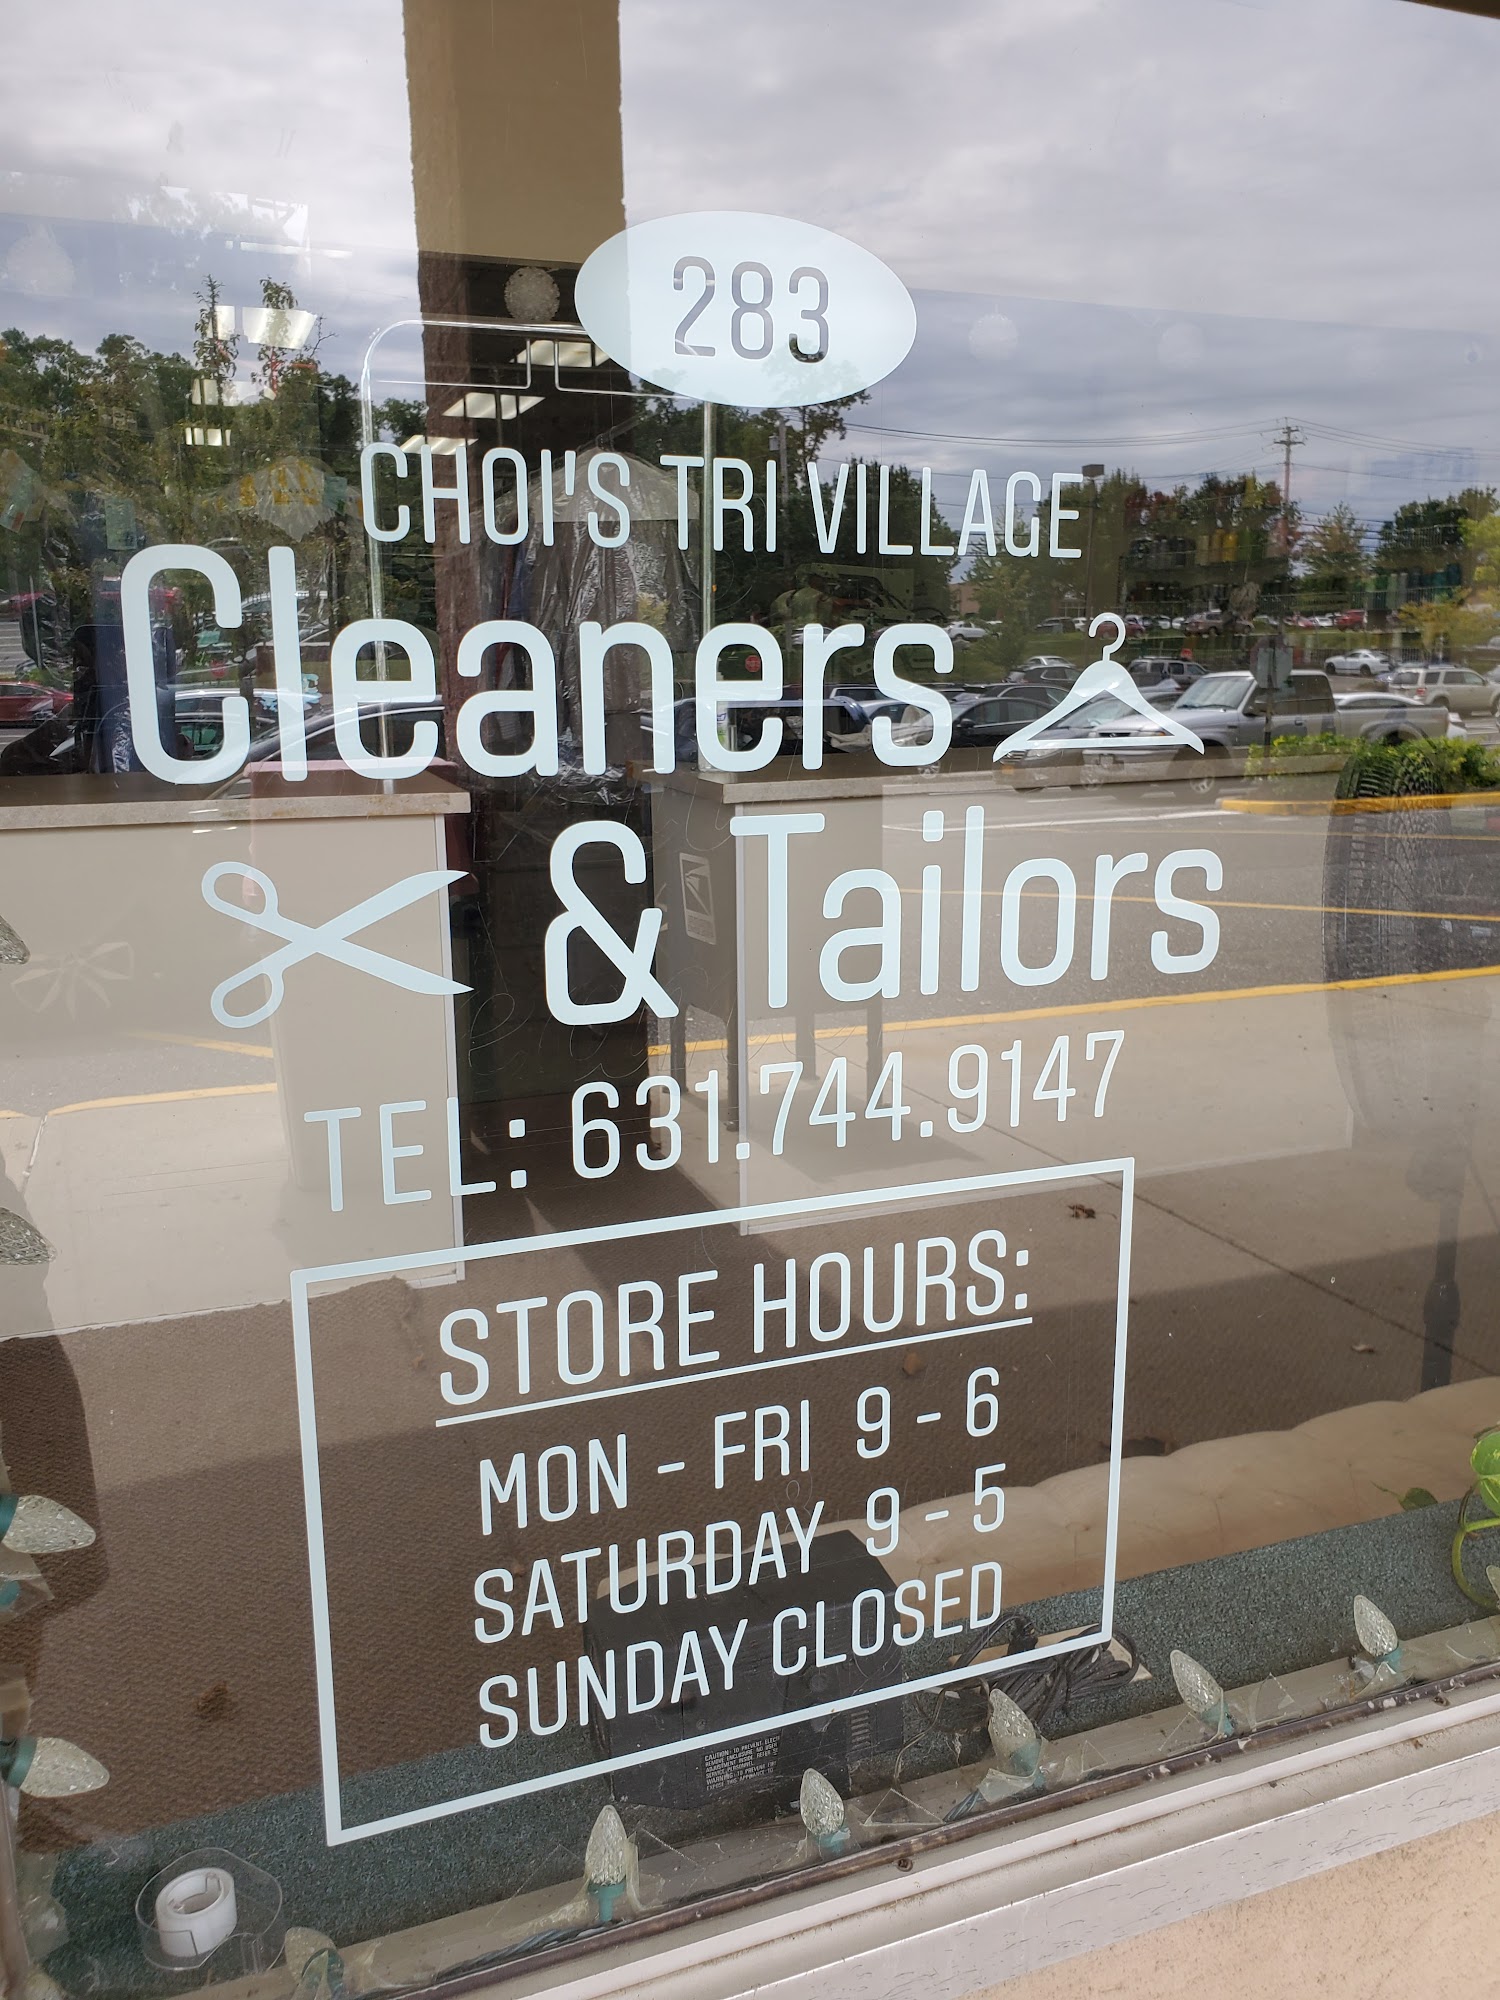 Choi's Tri-Village Cleaners & Tailors